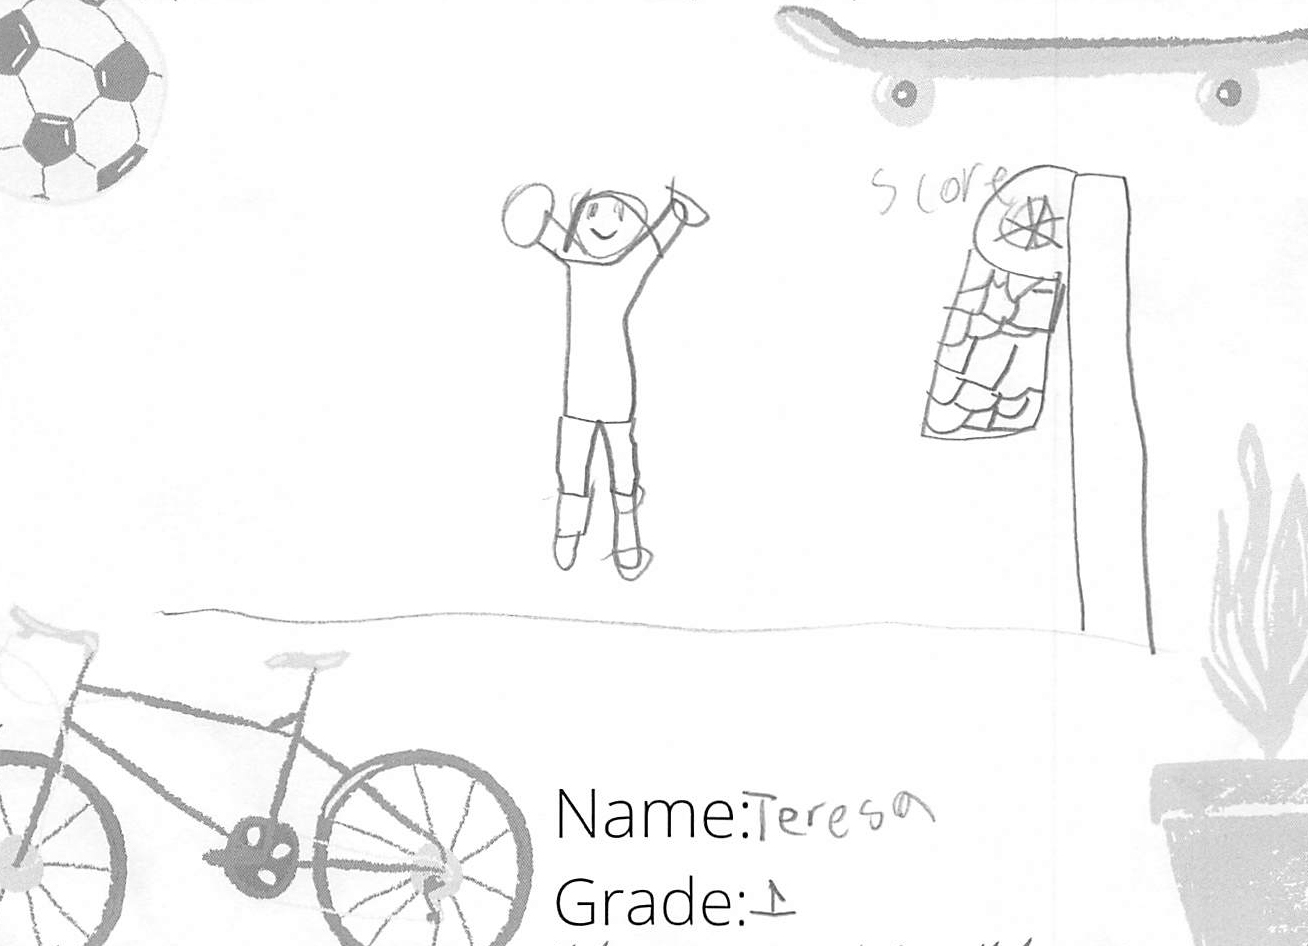 Pencil drawing for the SCORE! logo contest. The drawing includes a kid playing basketball.